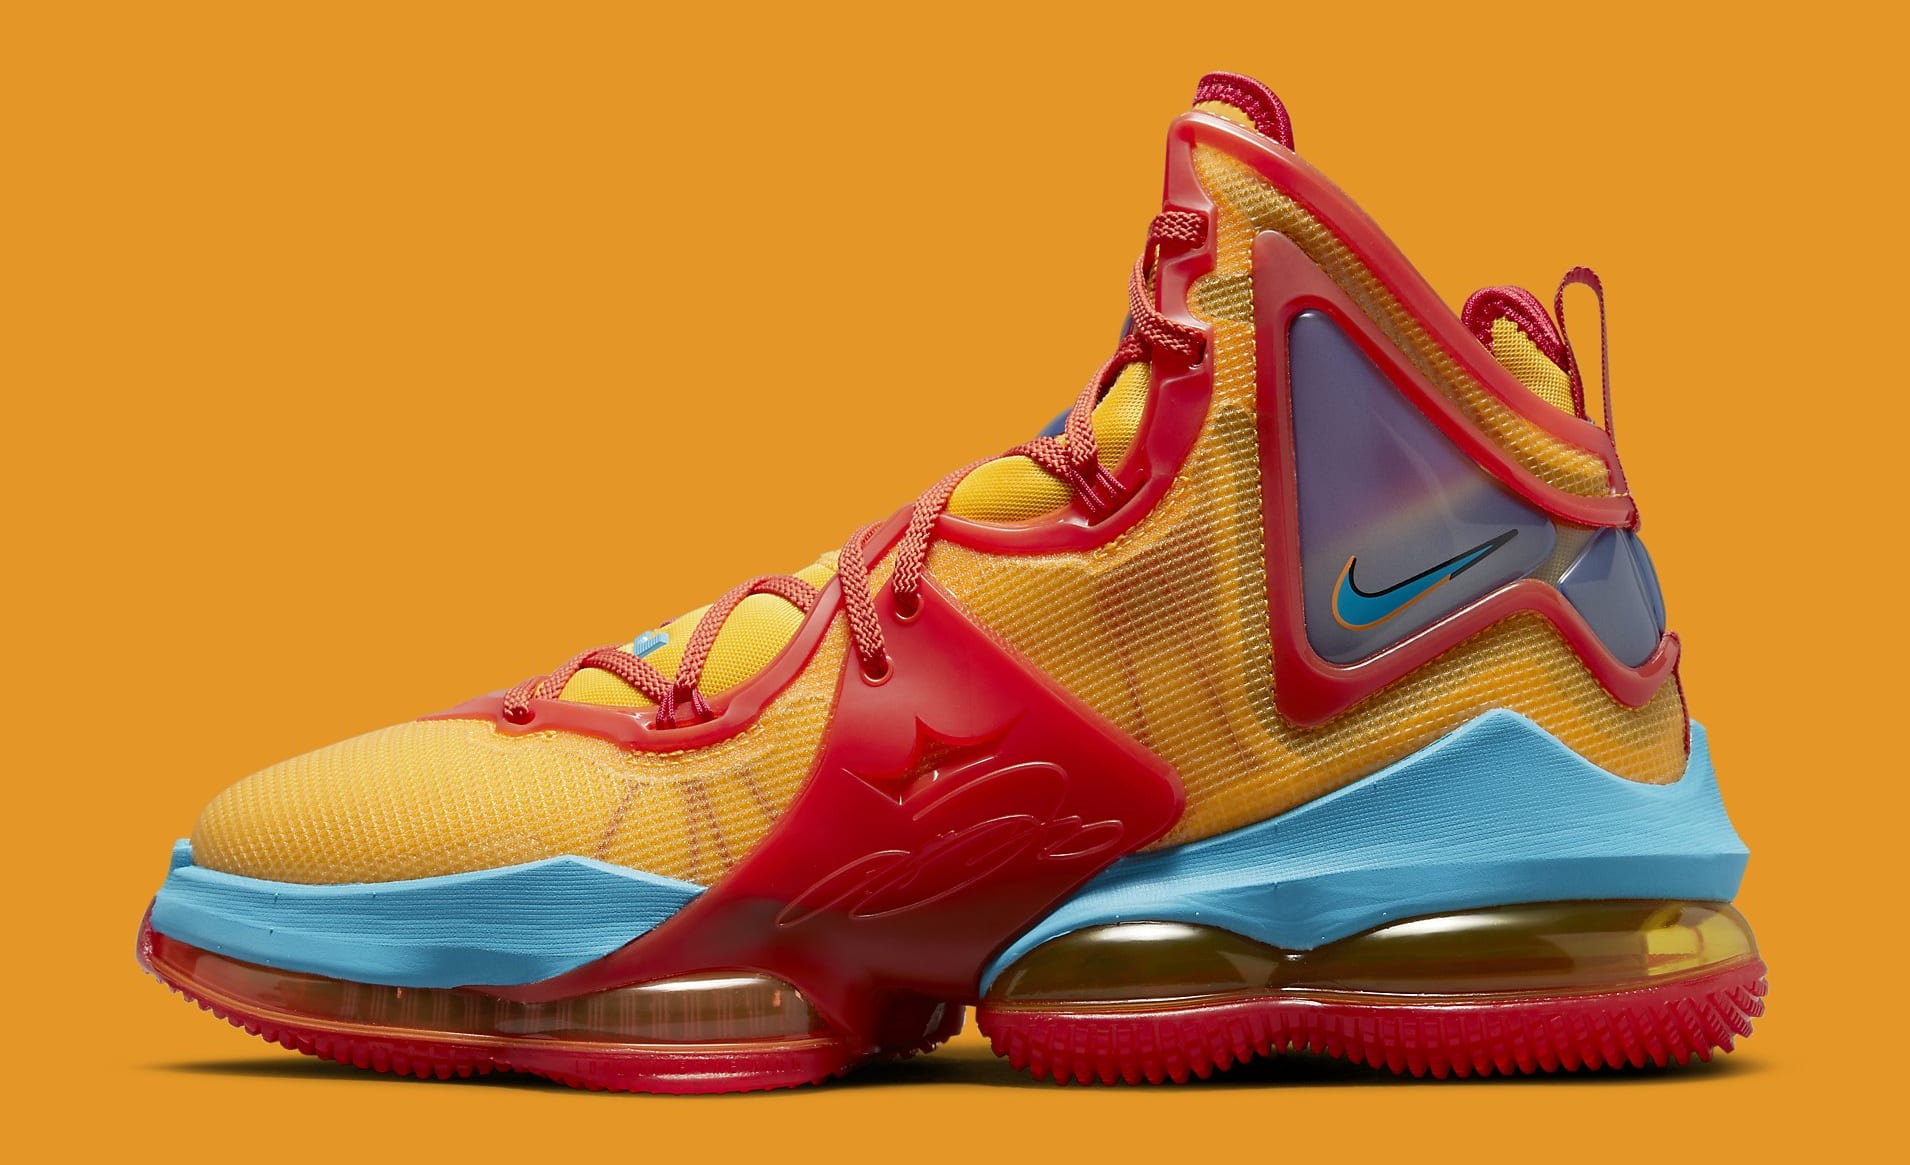 LeBron's original Akroncentric basketball shoes to be re-released by Nike